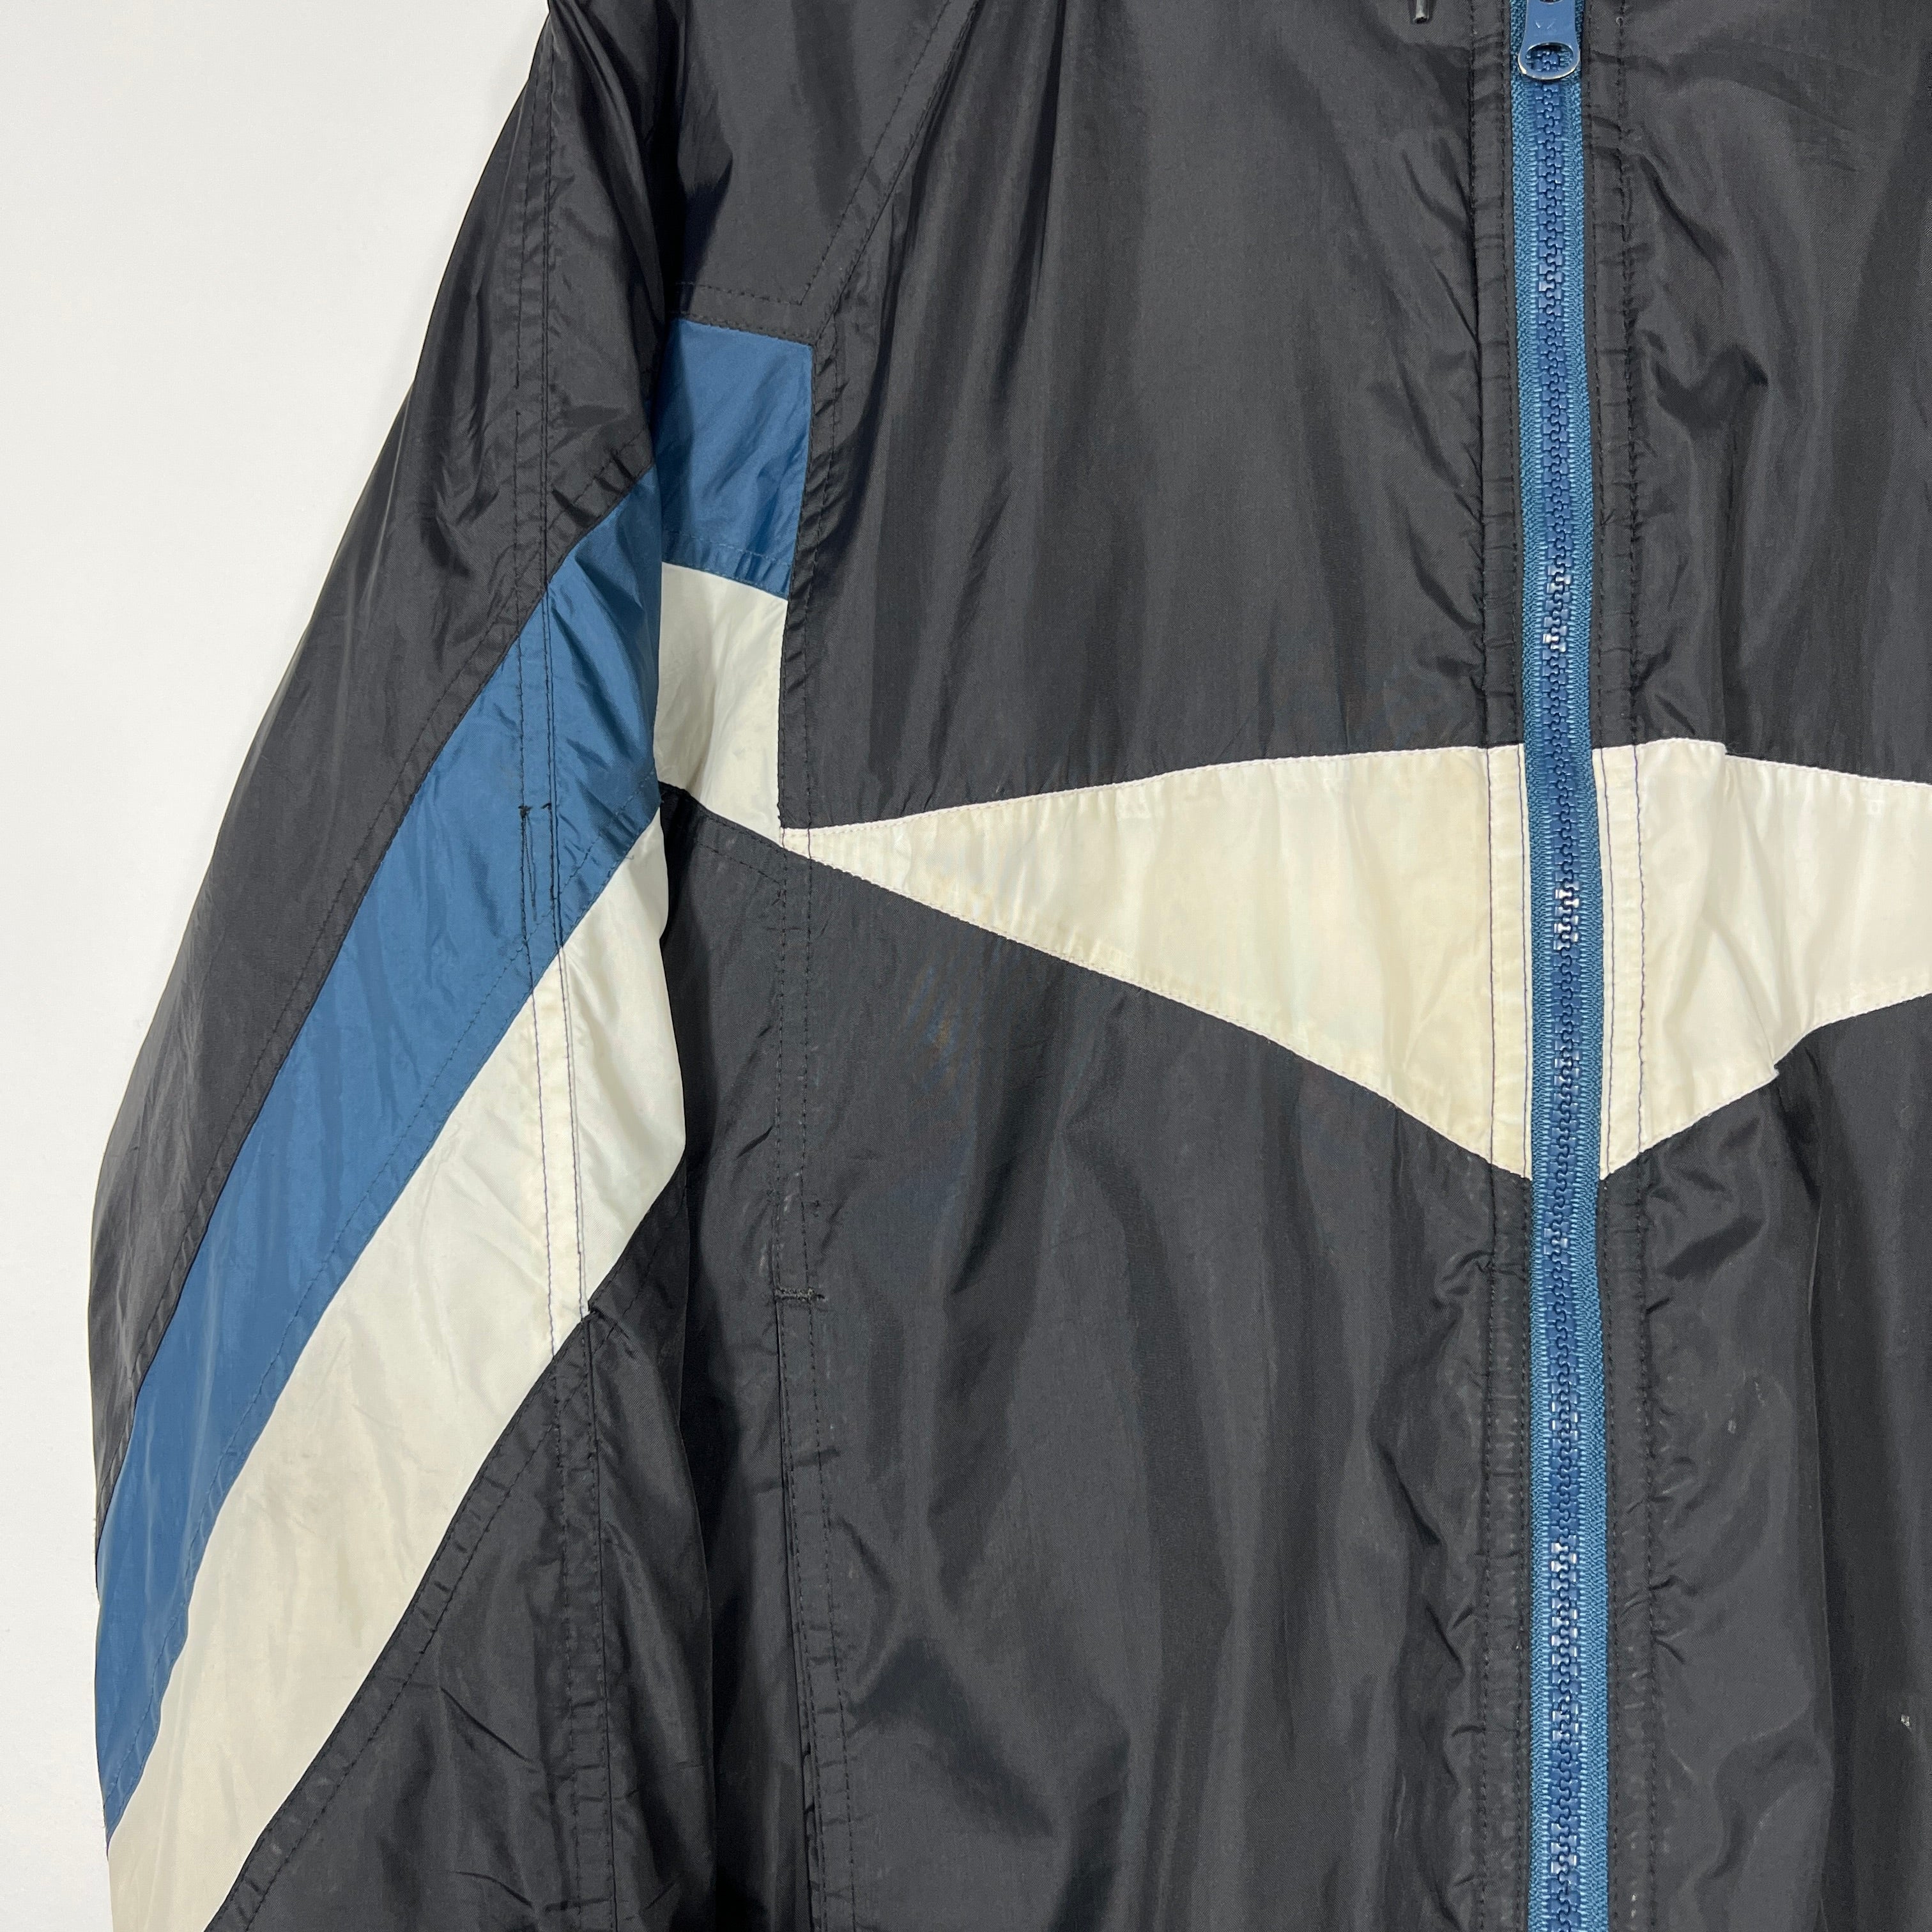 Vintage Umbro Reversible Insulated Jacket - Men's Small